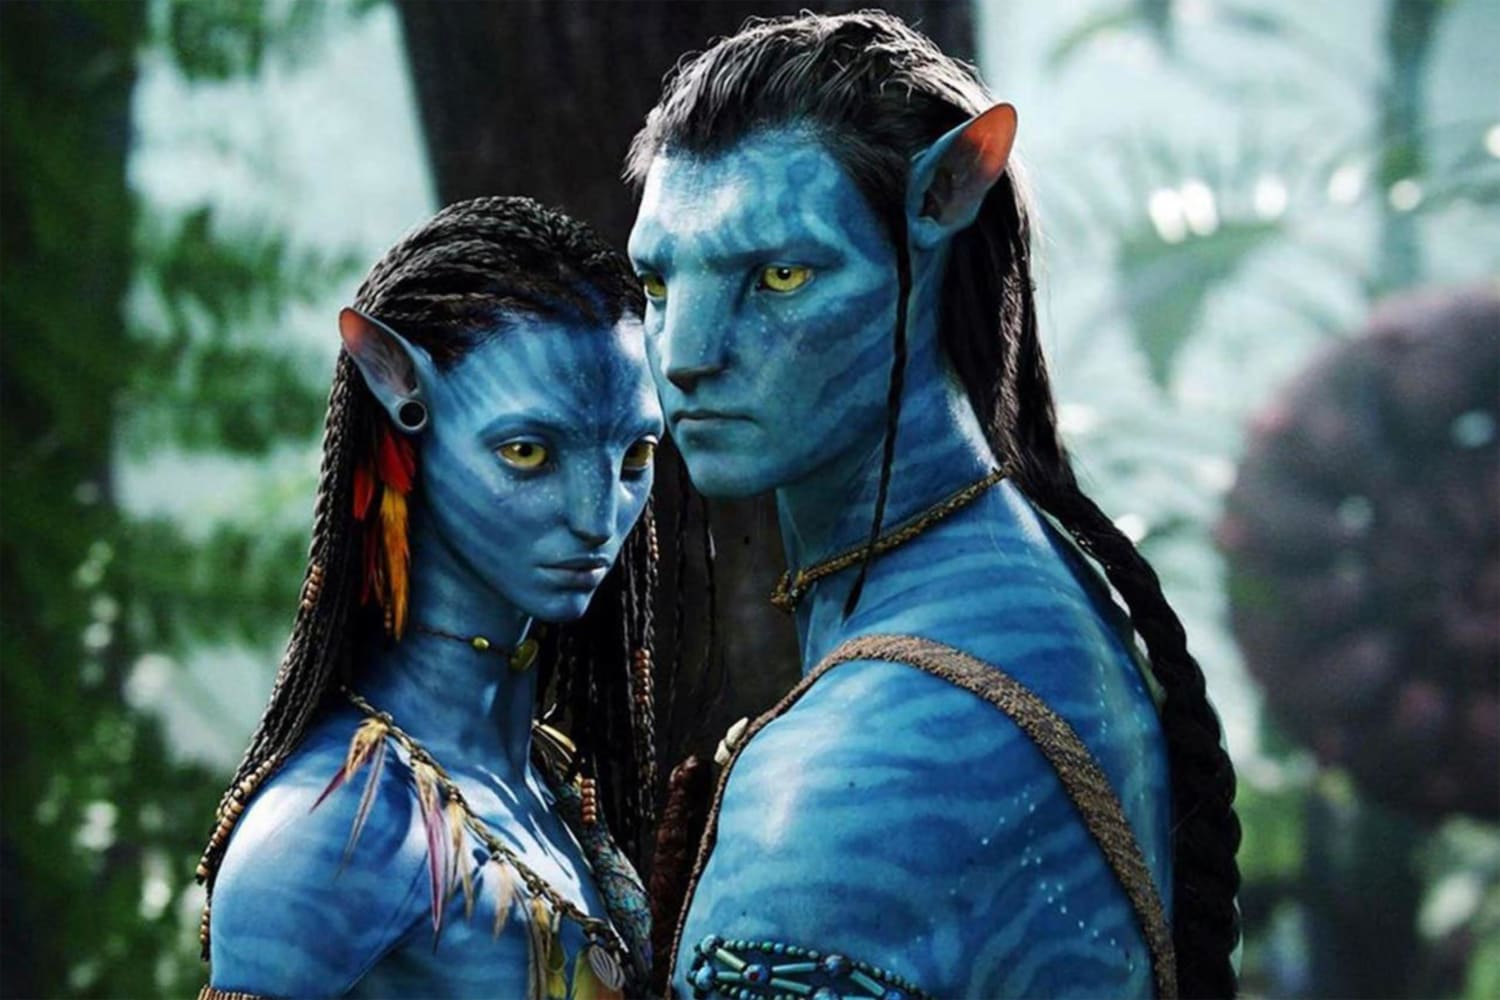 James Cameron directed, wrote, co-produced, and co-edited Avatar, a 2009 epic science fiction film starring Sam Worthington, Zoe Saldana, Stephen Lang, Michelle Rodriguez, and Sigourney Weaver.